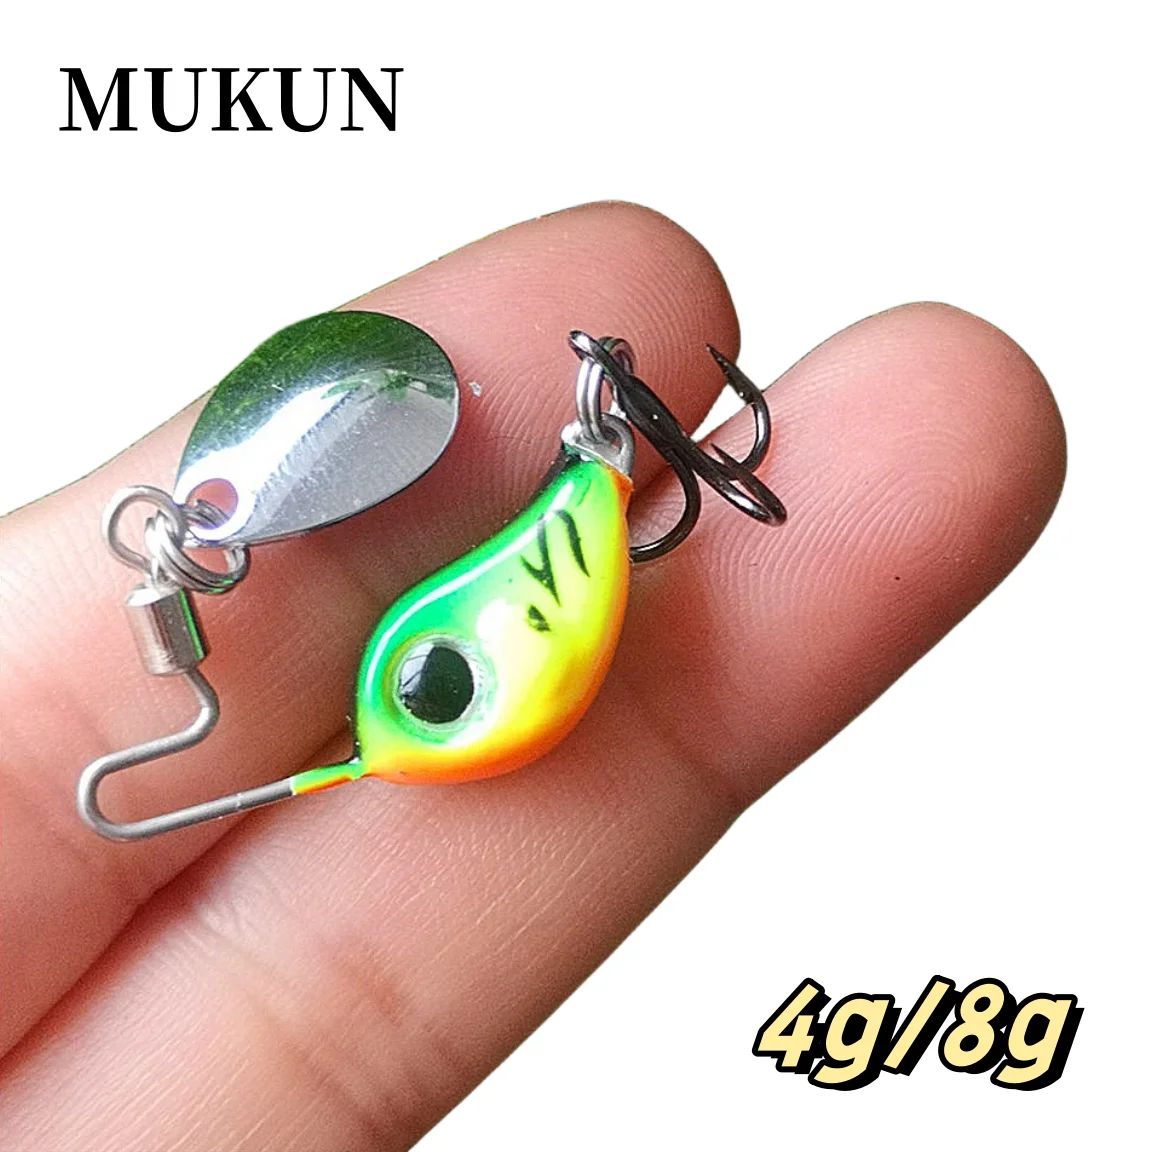 

Spinner Bait Sinking Metal Jig VIB Chatterbait Rotating Tail Vatalion Lure Sea Fishing Tackle Bass Carp Spoon Wobblers Buzzbait